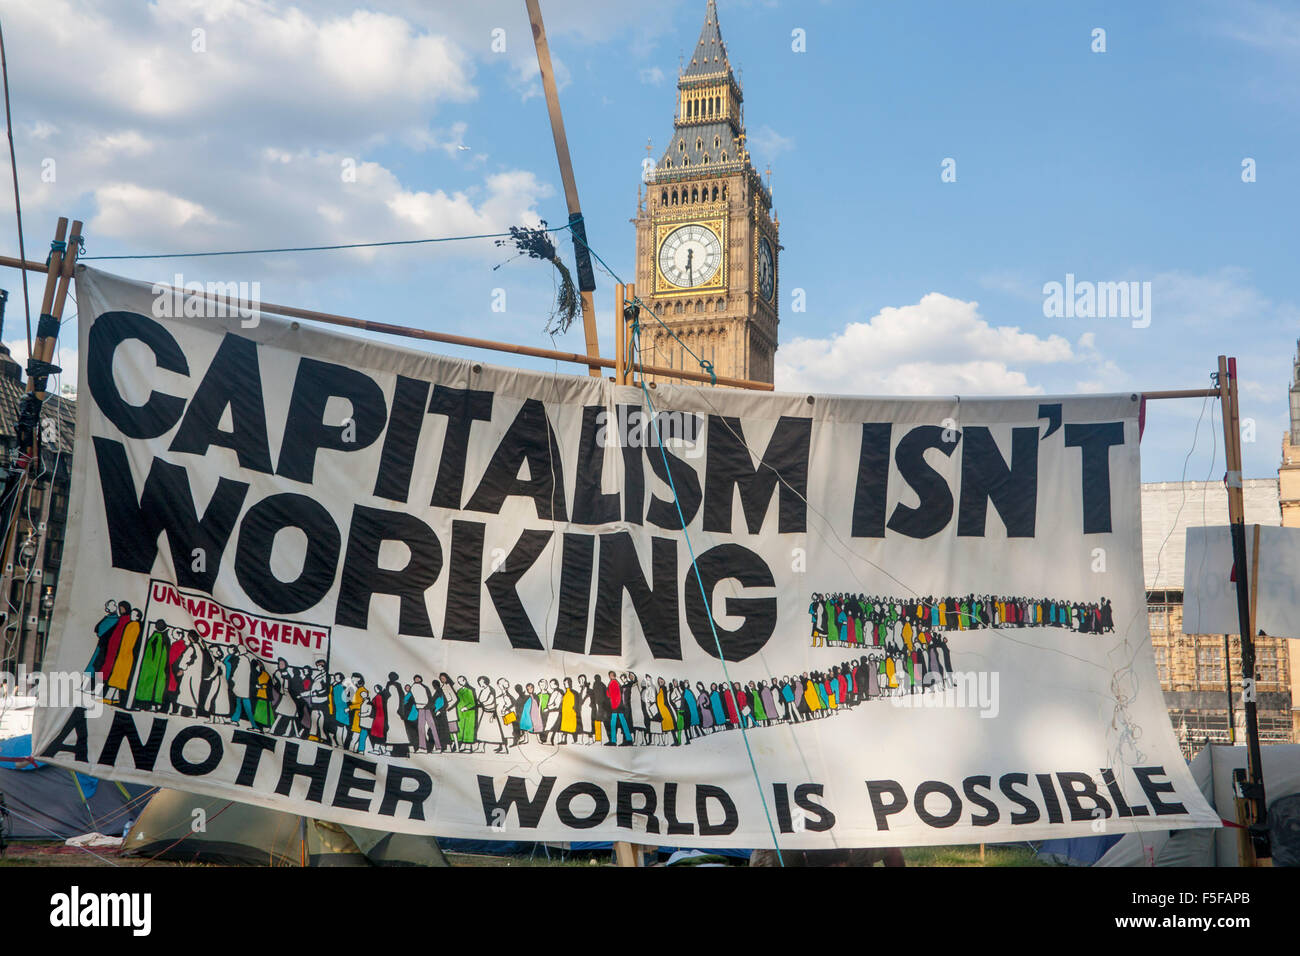 Capitalism Isn't Working banner at protest camp Houses of Parliament London England UK Stock Photo